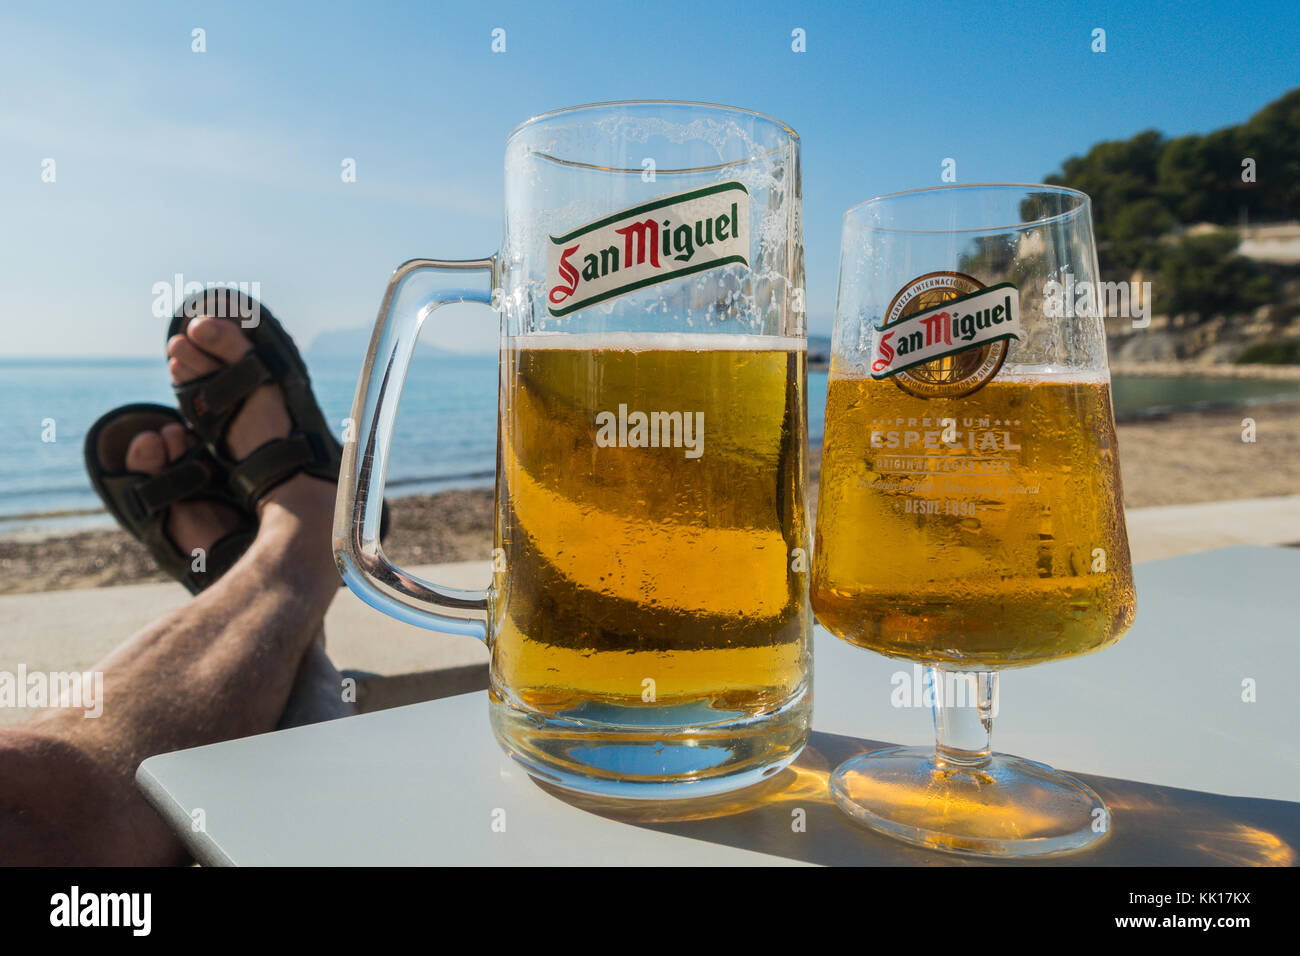 images San and - Alamy photography miguel spanish lager stock hi-res